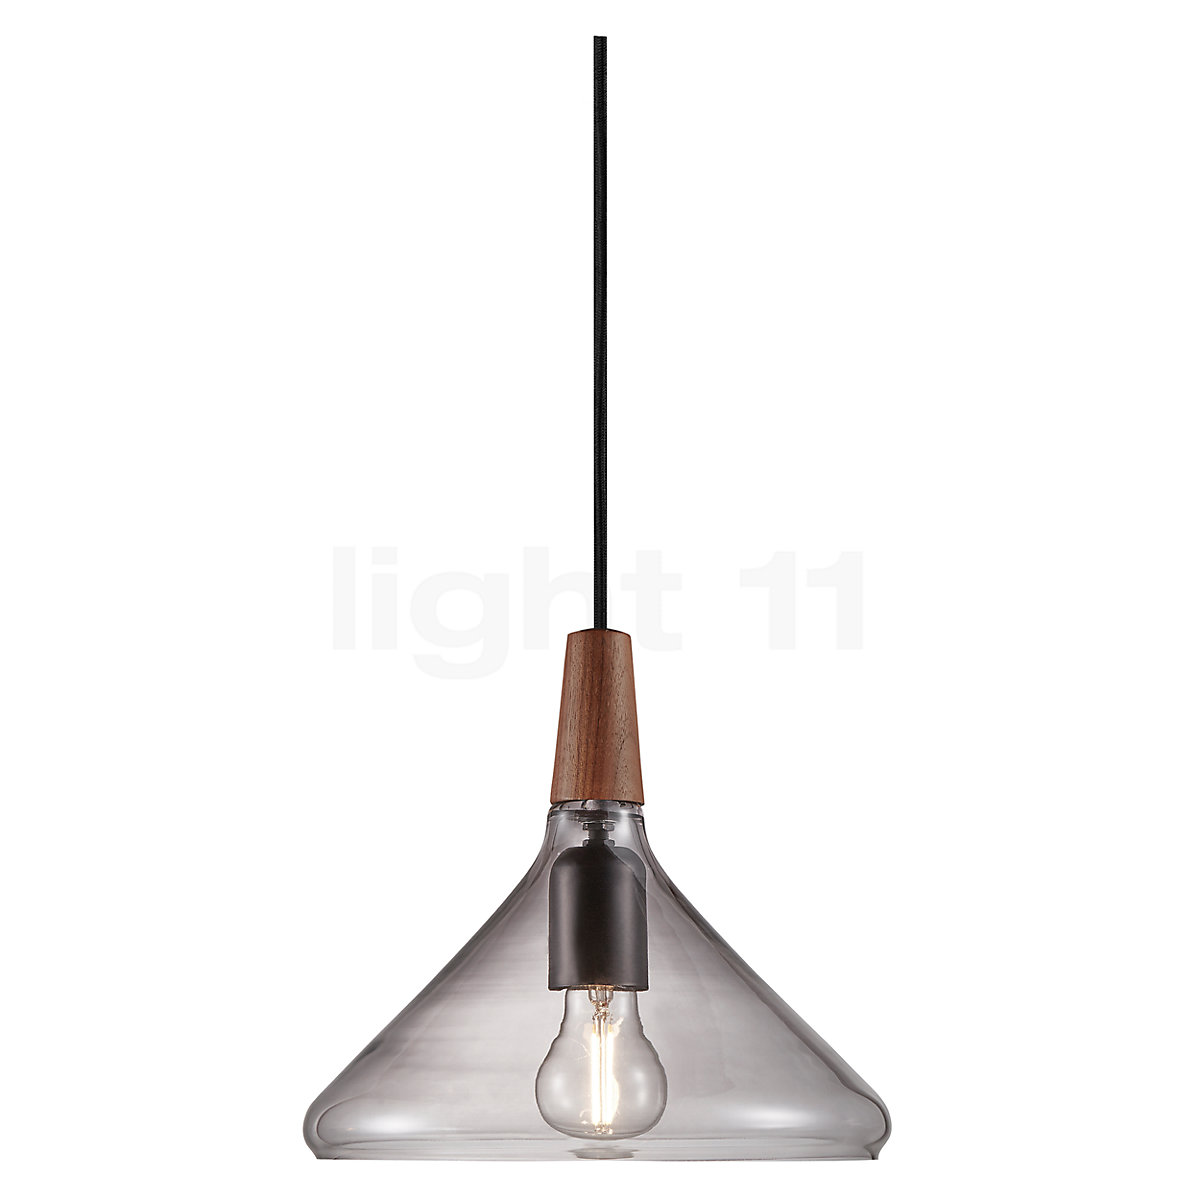 Nori for Buy the People Design Pendant at Light